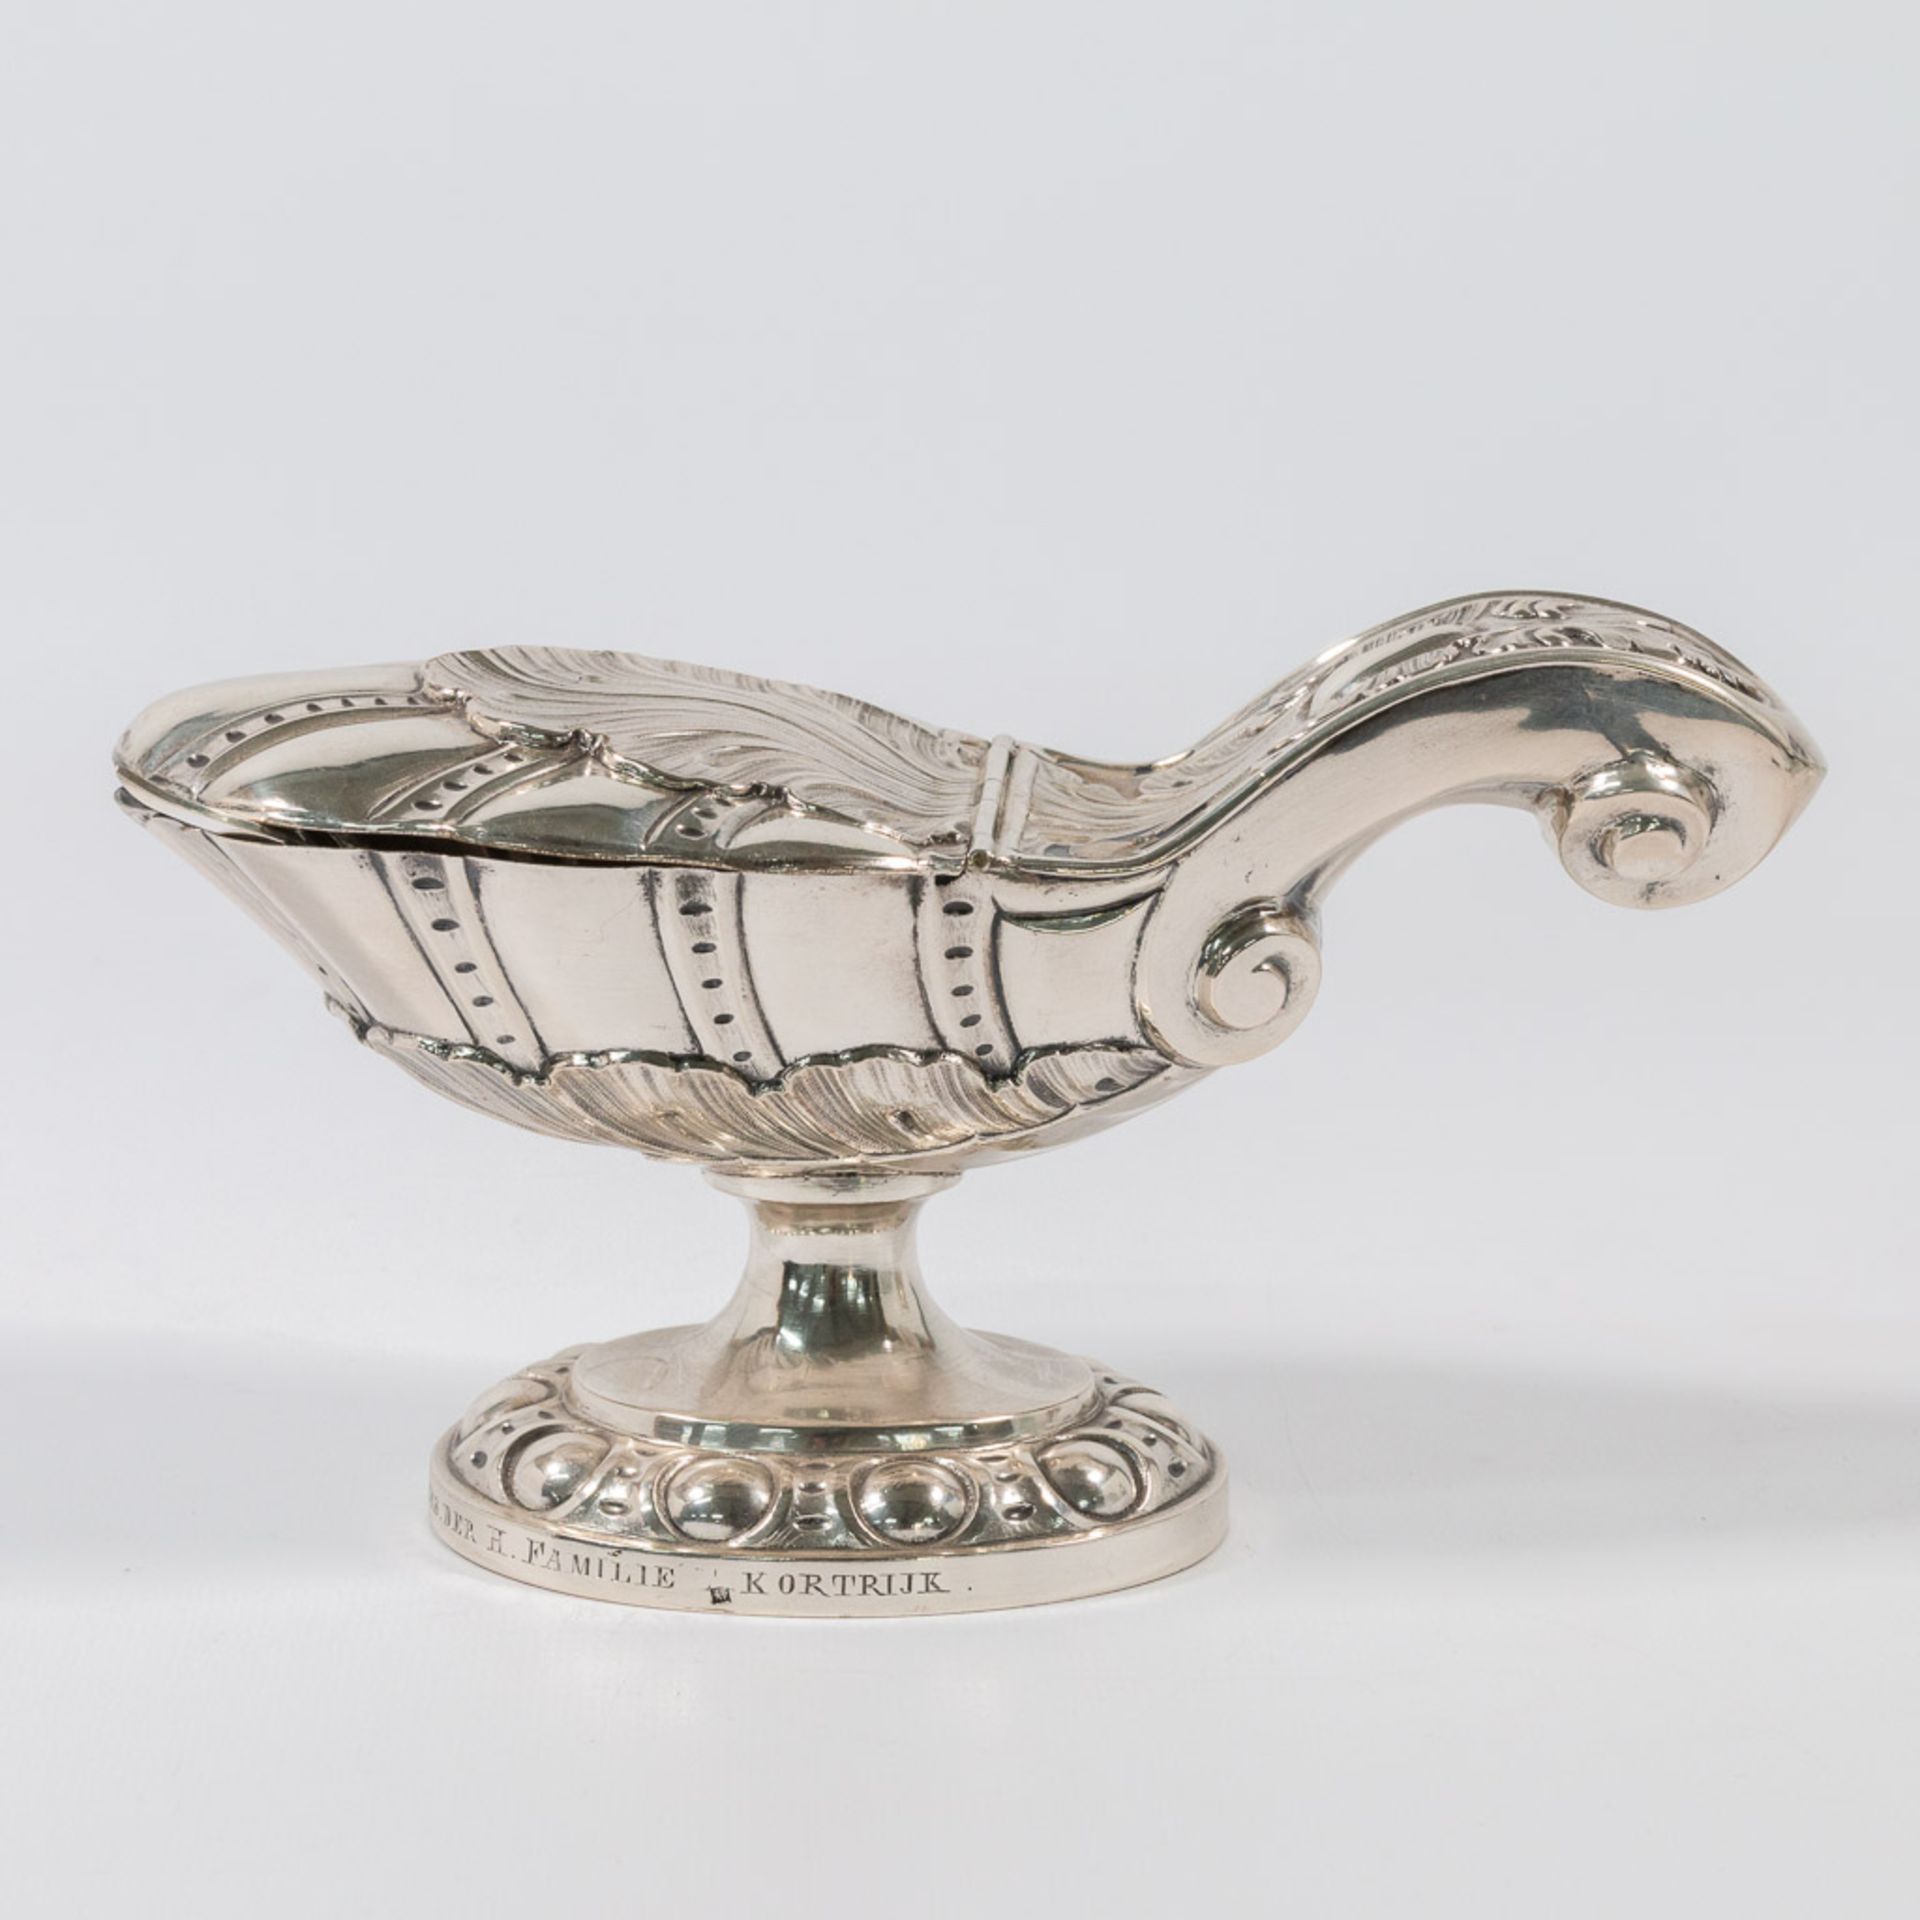 A silver Insence burner and Insence jar. - Image 12 of 39